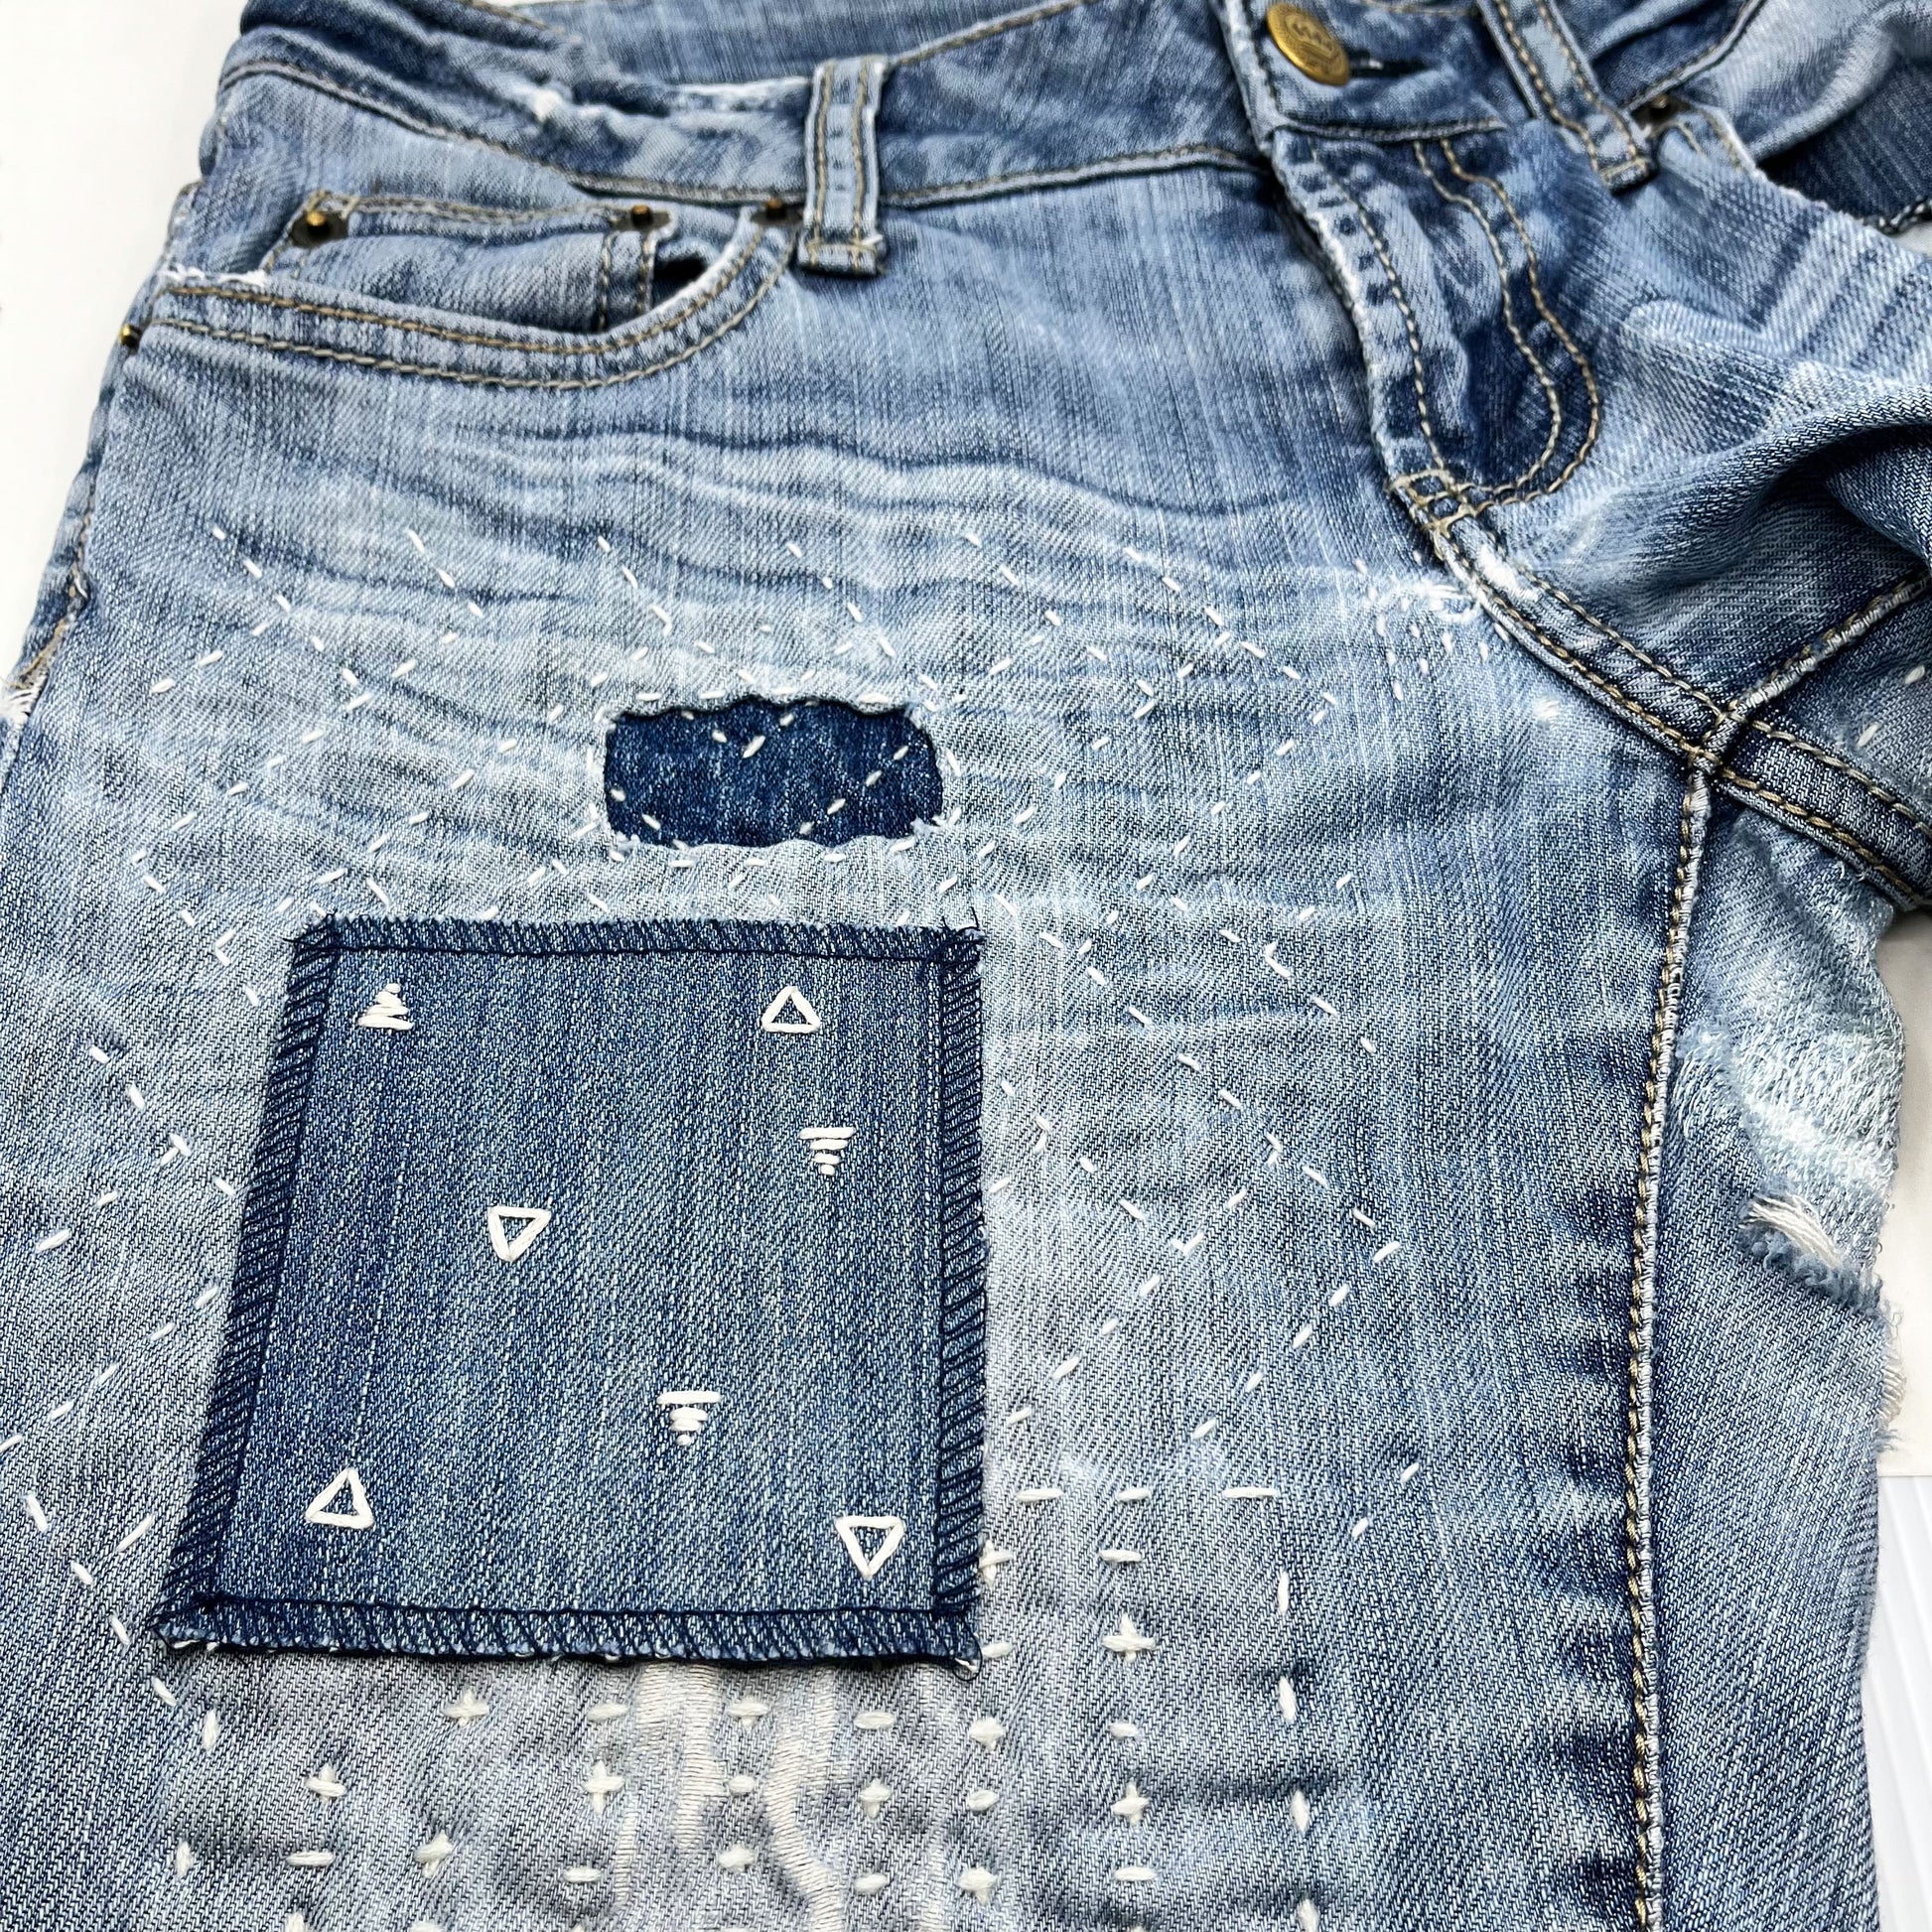 a square patch made out of denim, handstitched with scattered ivory triangles, some as outlines some with a line fill, with overlocked edges, on jeans with other visible mending and sashiko stitching